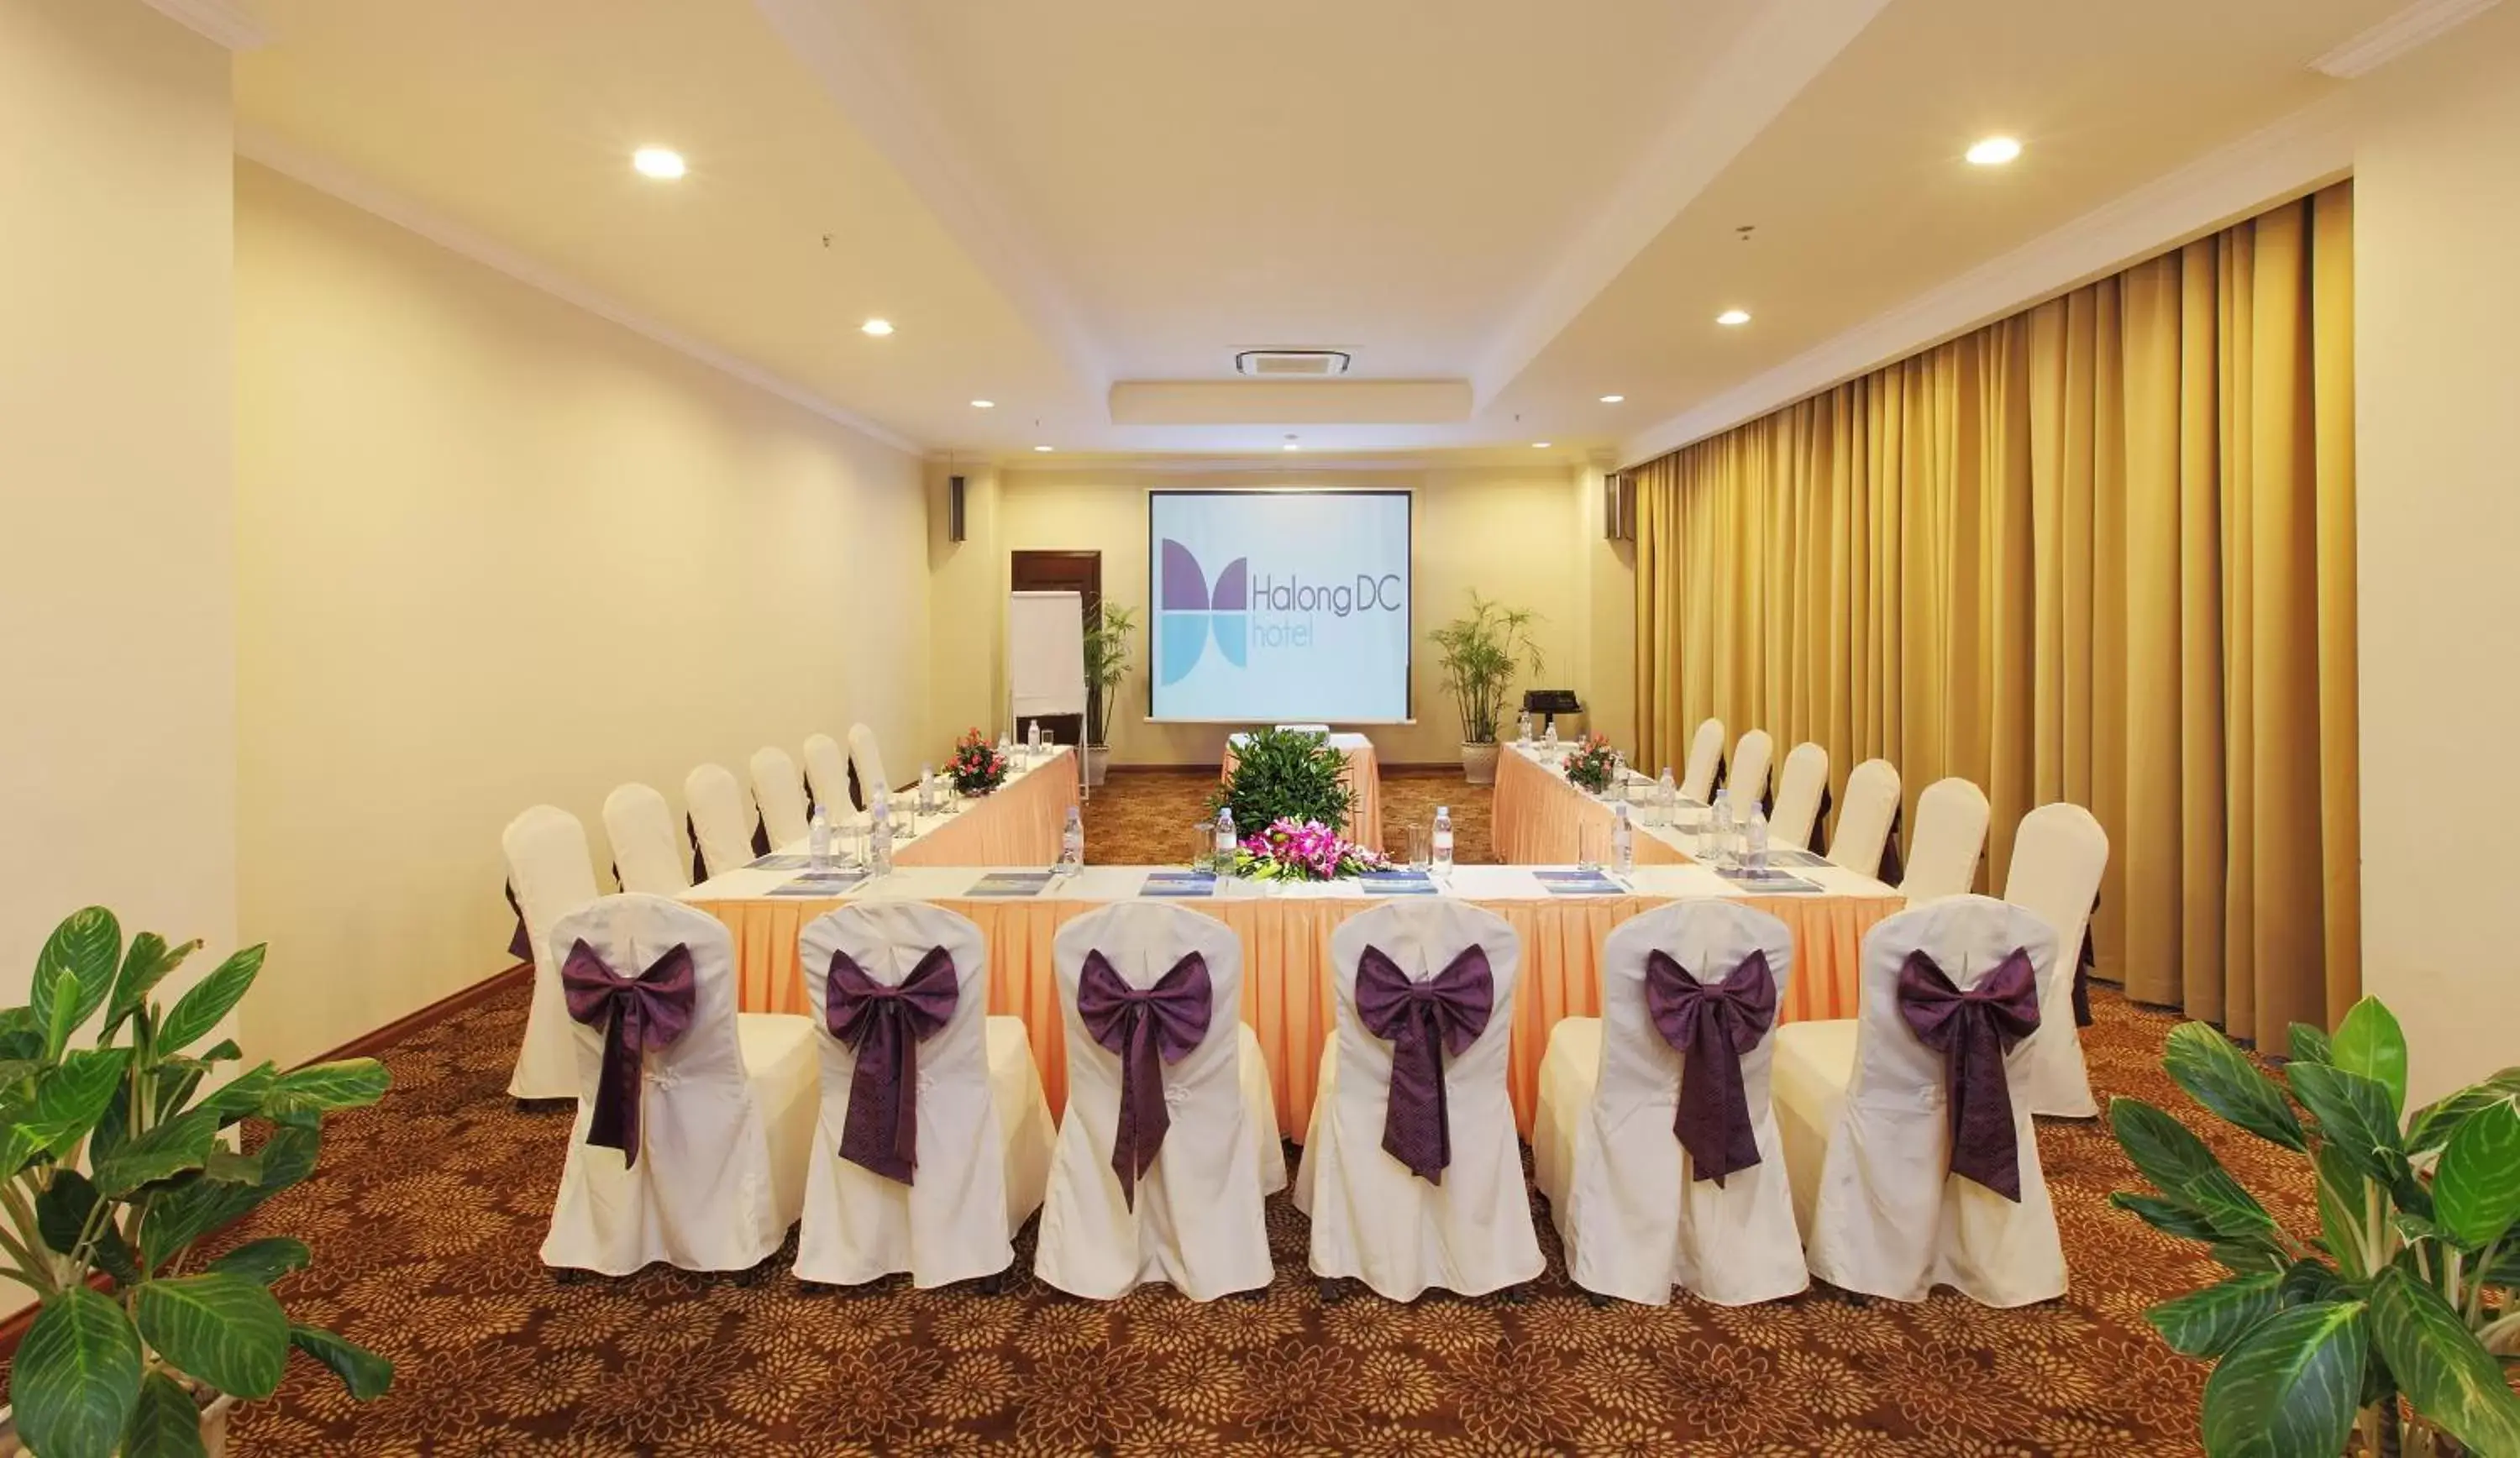 Business facilities in Ha Long DC Hotel